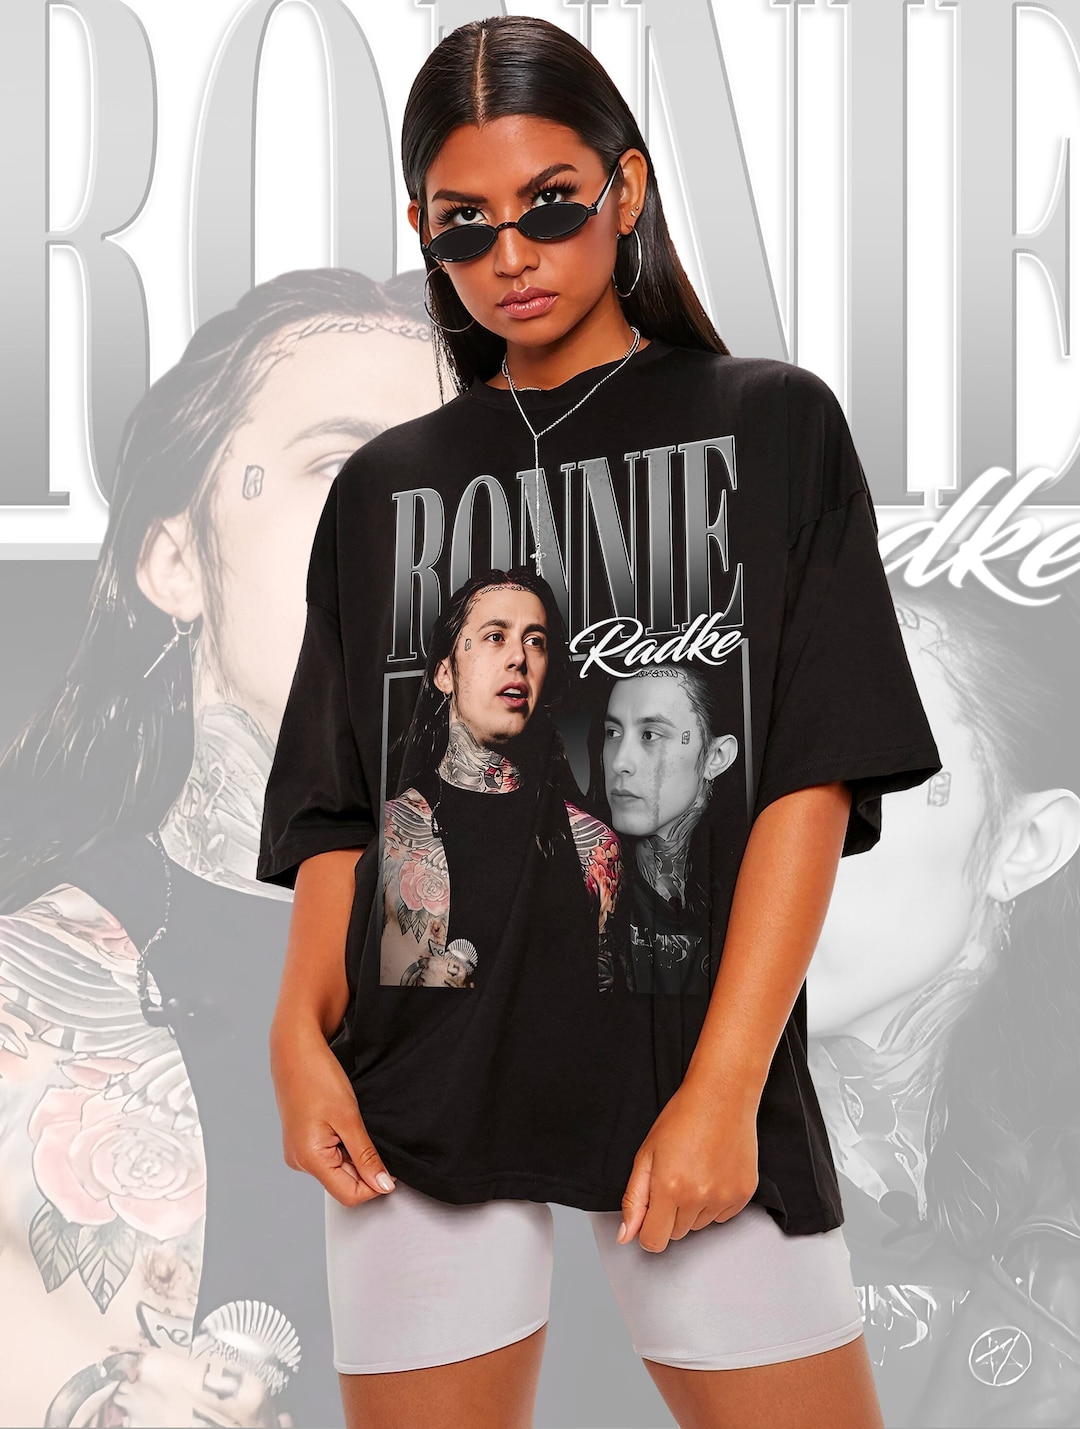 RONNIE RADKE Shirt, Ronnie Radke T-shirt, Ronnie Radke Gifts, Ronnie ...